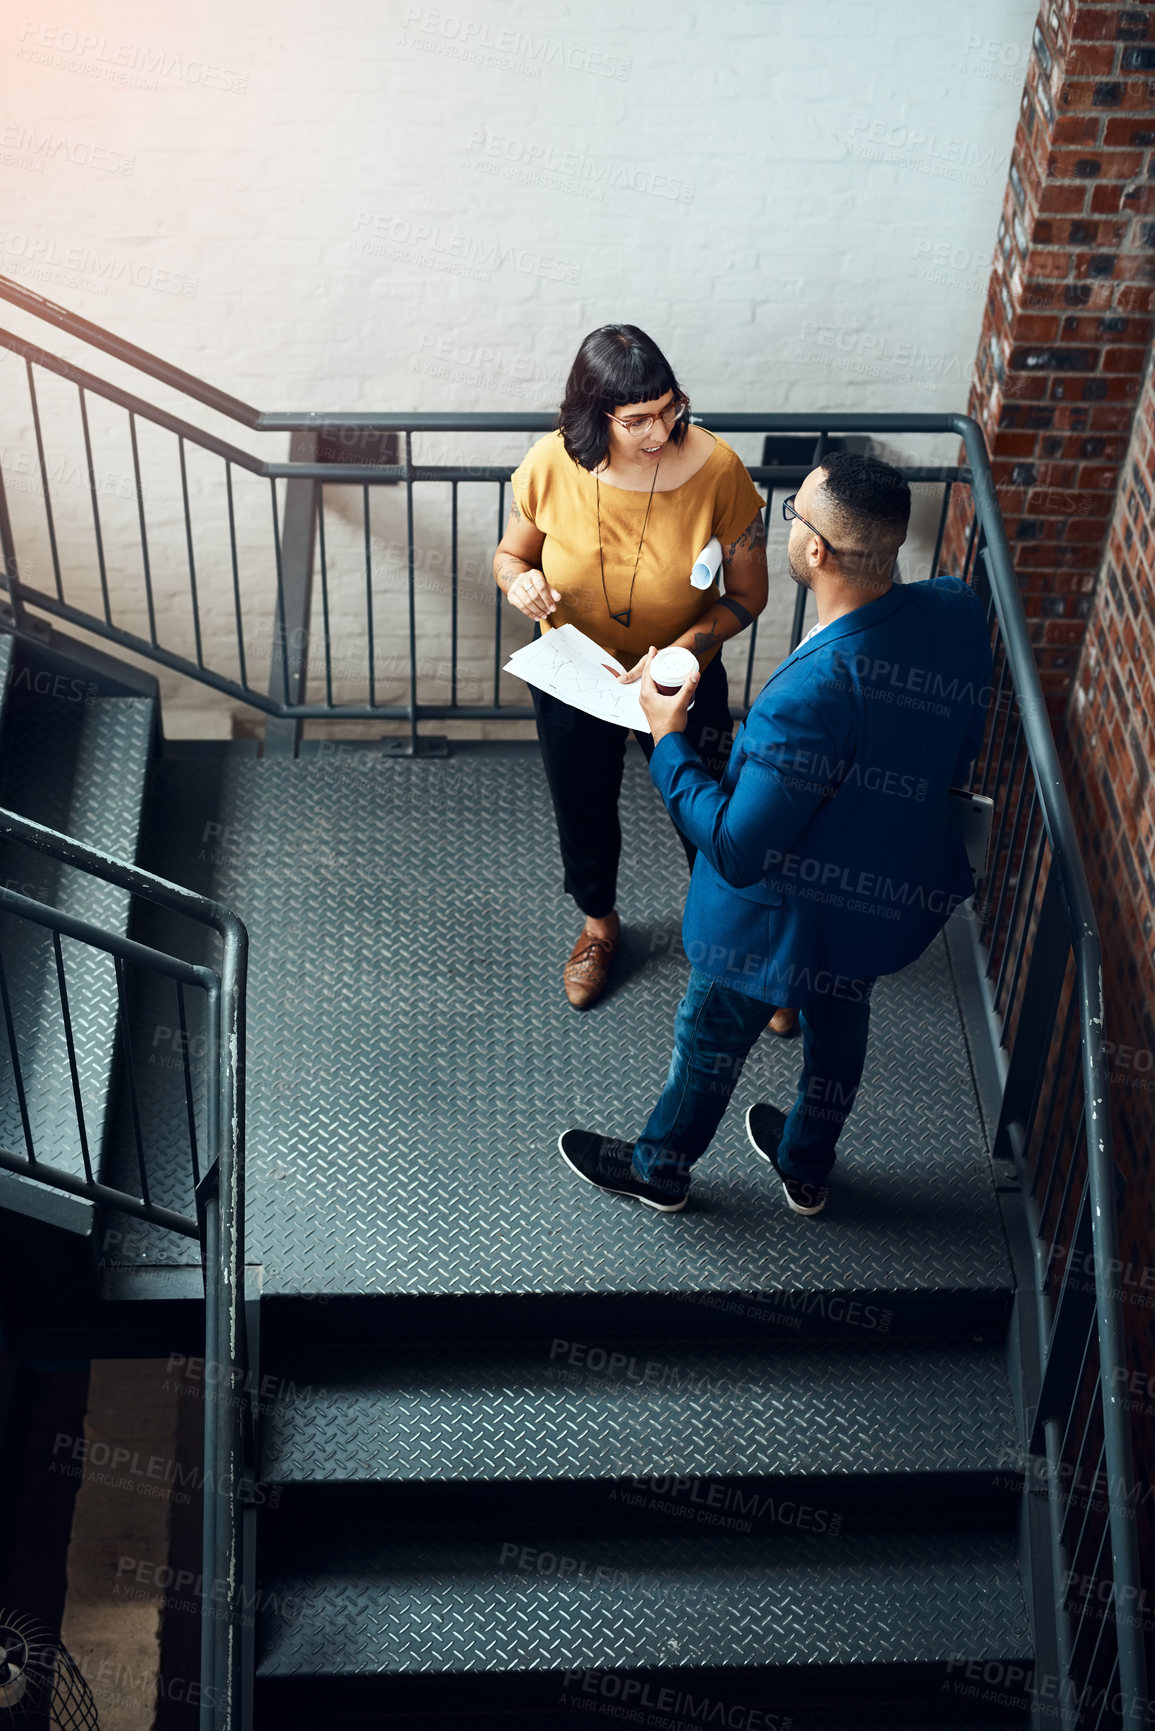 Buy stock photo Shot of two designers having a discussion on a staircase in an office